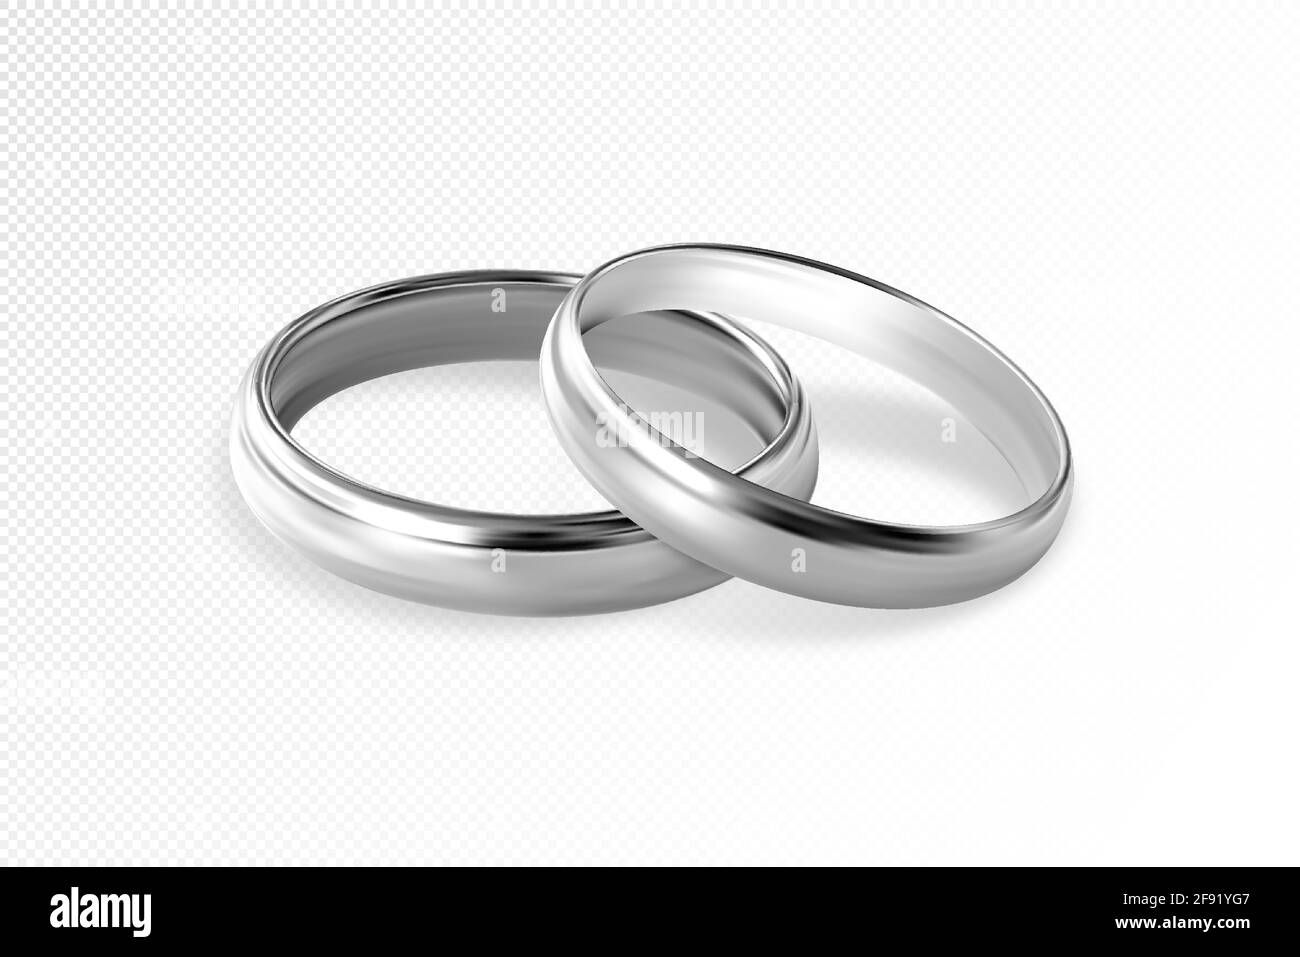 Two silver or platinum wedding rings on transparent background. Quality ...